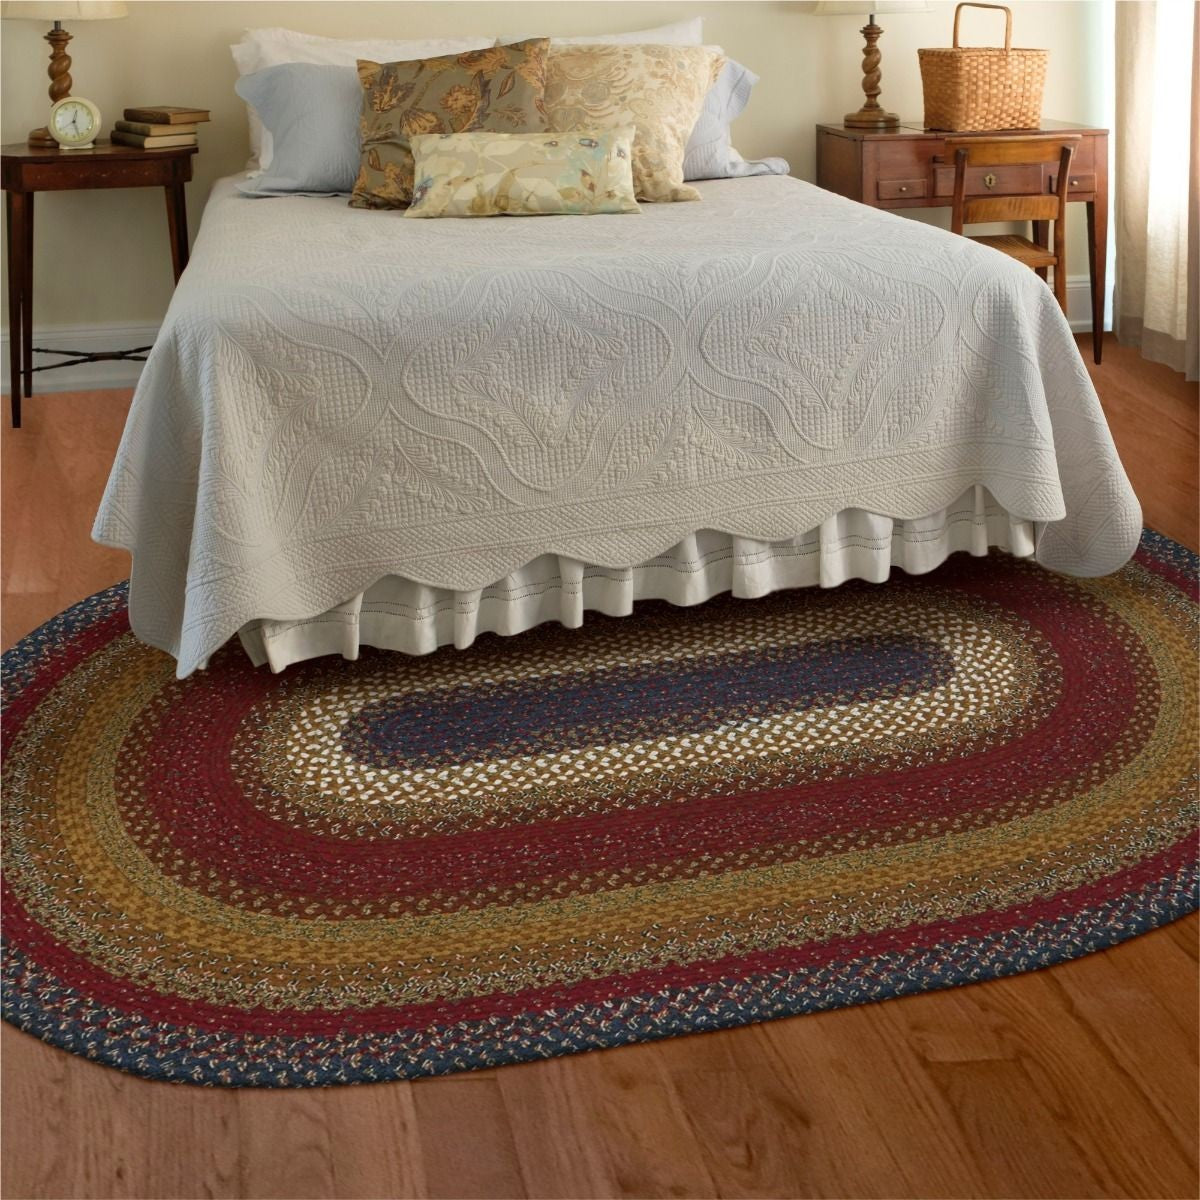 Log Cabin Step Blue-Burgundy-Brown Oval Cotton Braided Rugs